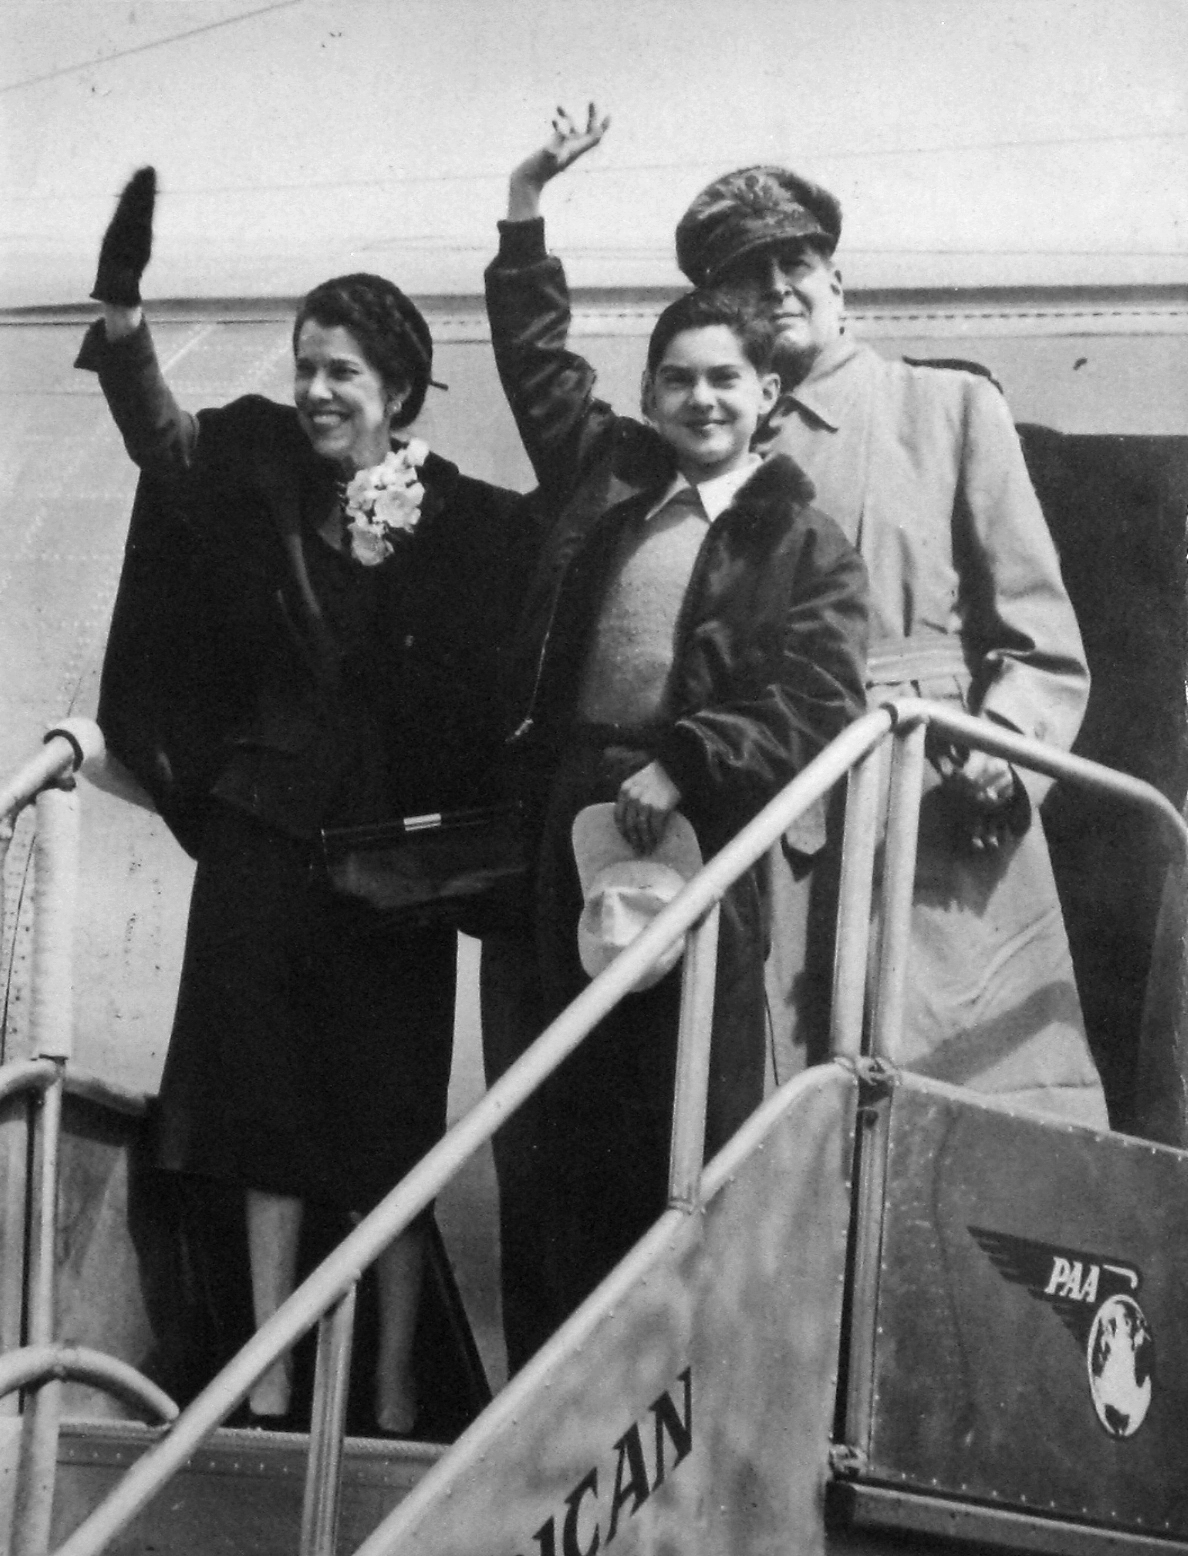 Black-and-white photograph of Douglas MacArthur with his wife and son, standing on the boarding ramp of an aircraft. Two of them are waving. 